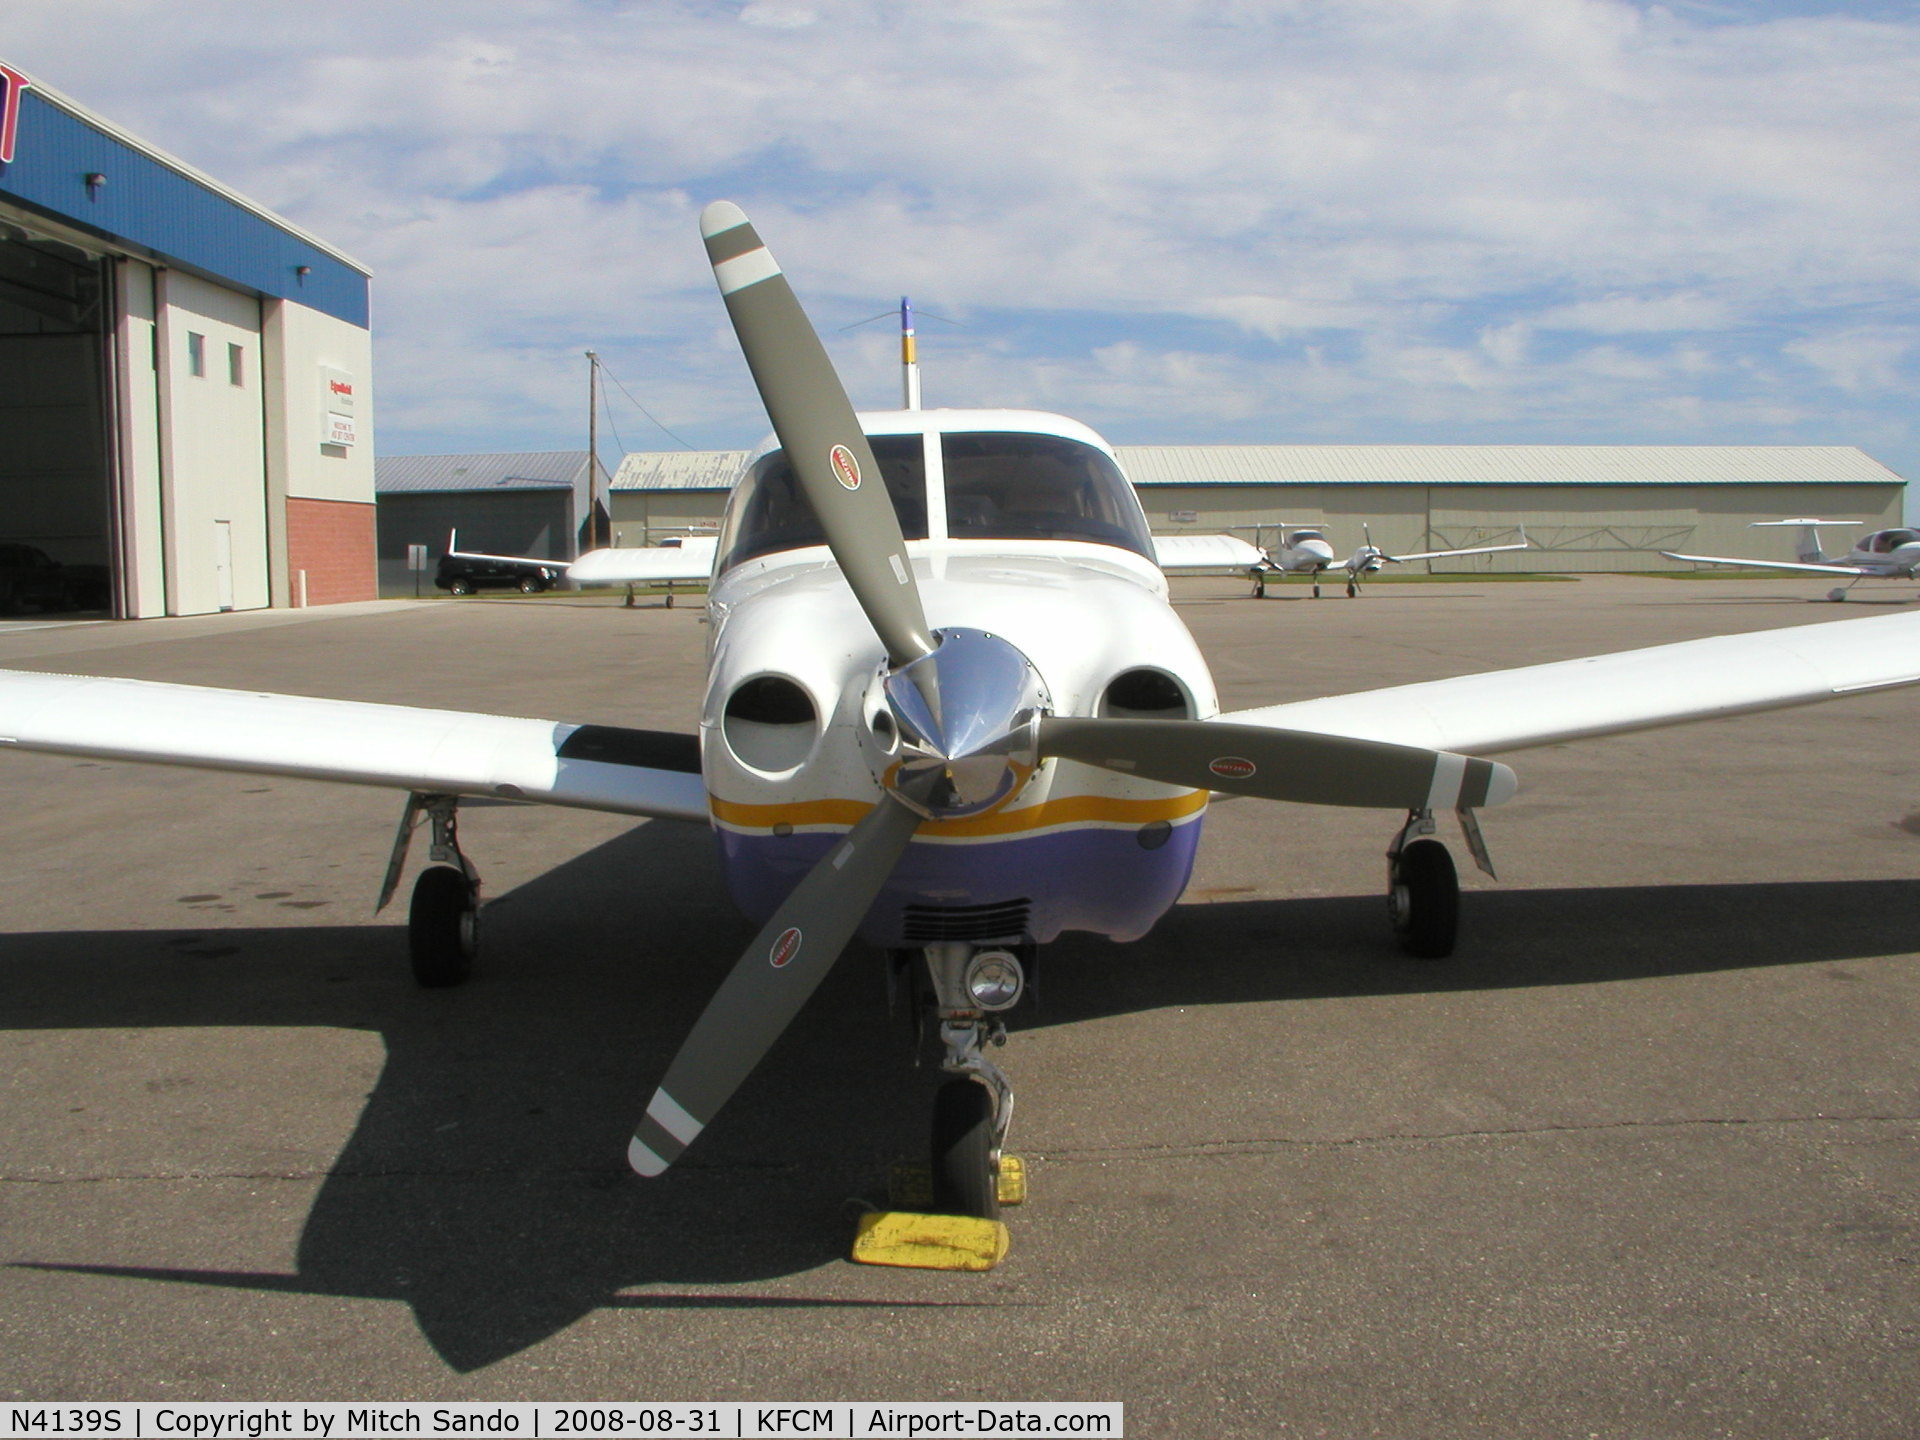 N4139S, 1999 Piper PA-32R-301T Turbo Saratoga C/N 3257099, Parked on the ramp at ASI Jet Center.